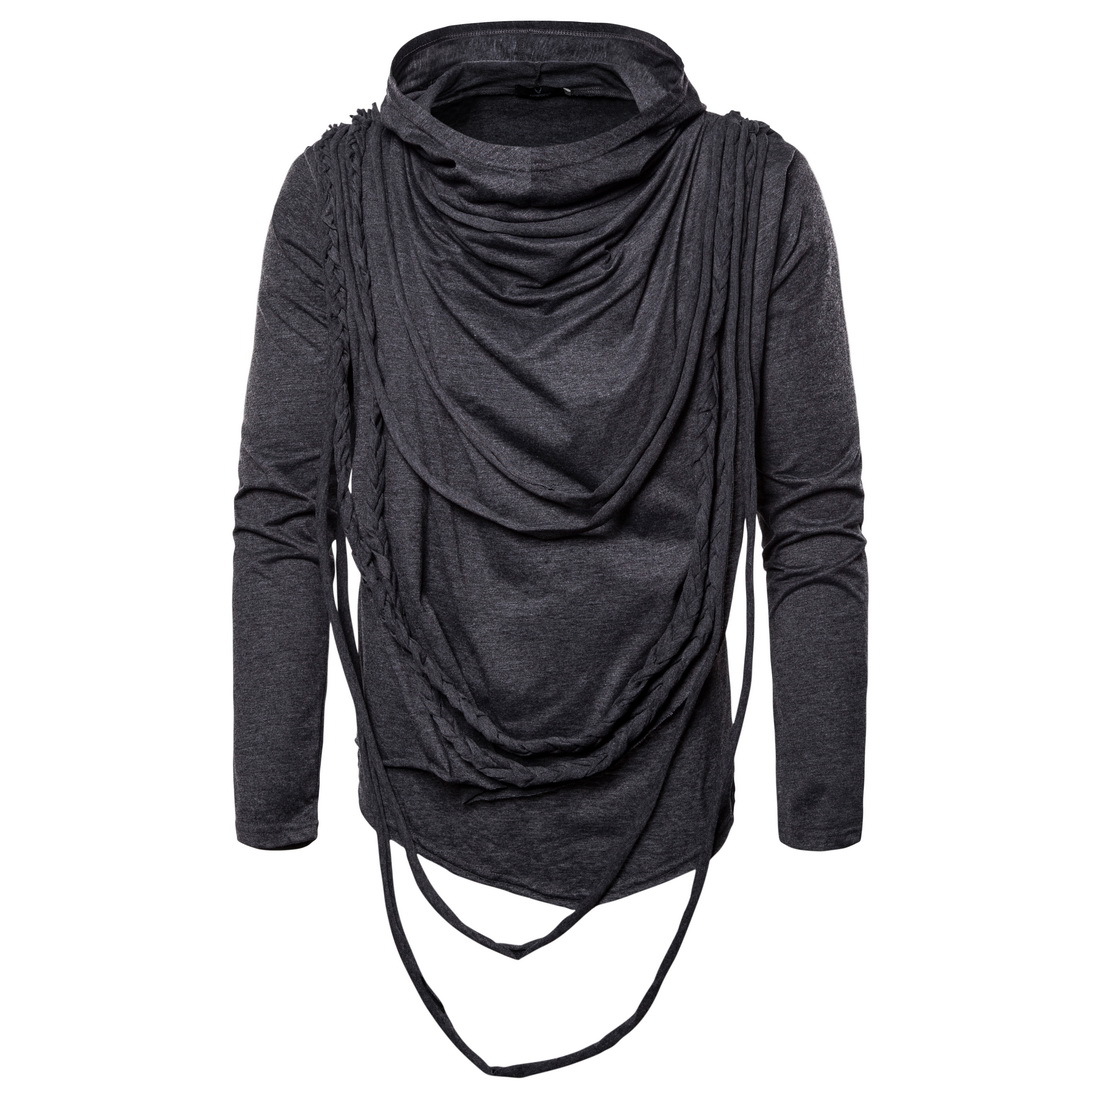 Fashion Spring Autumn Winter Clothing Trend Long-sleeved Pullovers Men T Shirt Tops Dary Gray